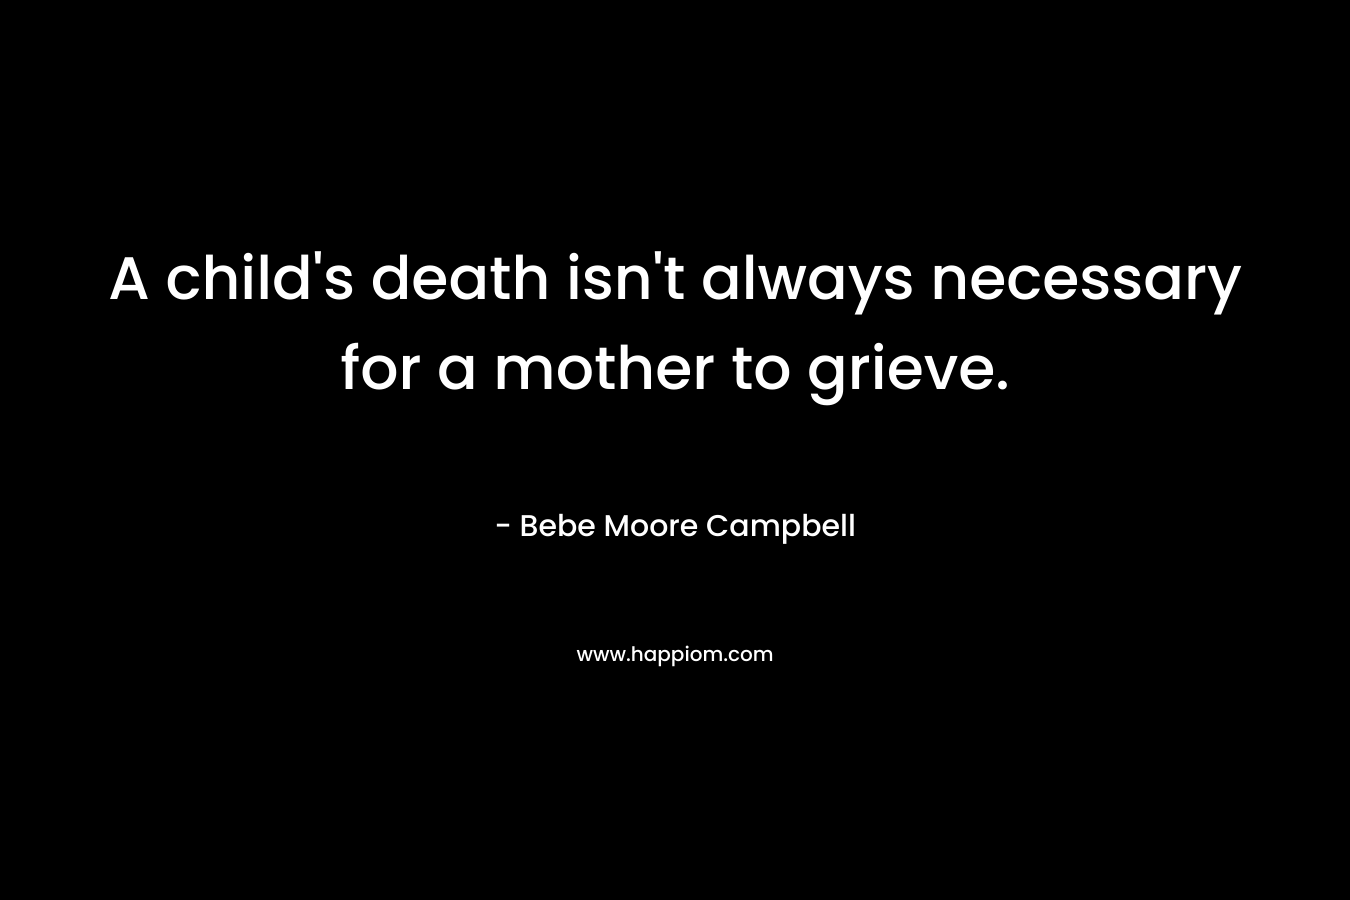 A child’s death isn’t always necessary for a mother to grieve. – Bebe Moore Campbell